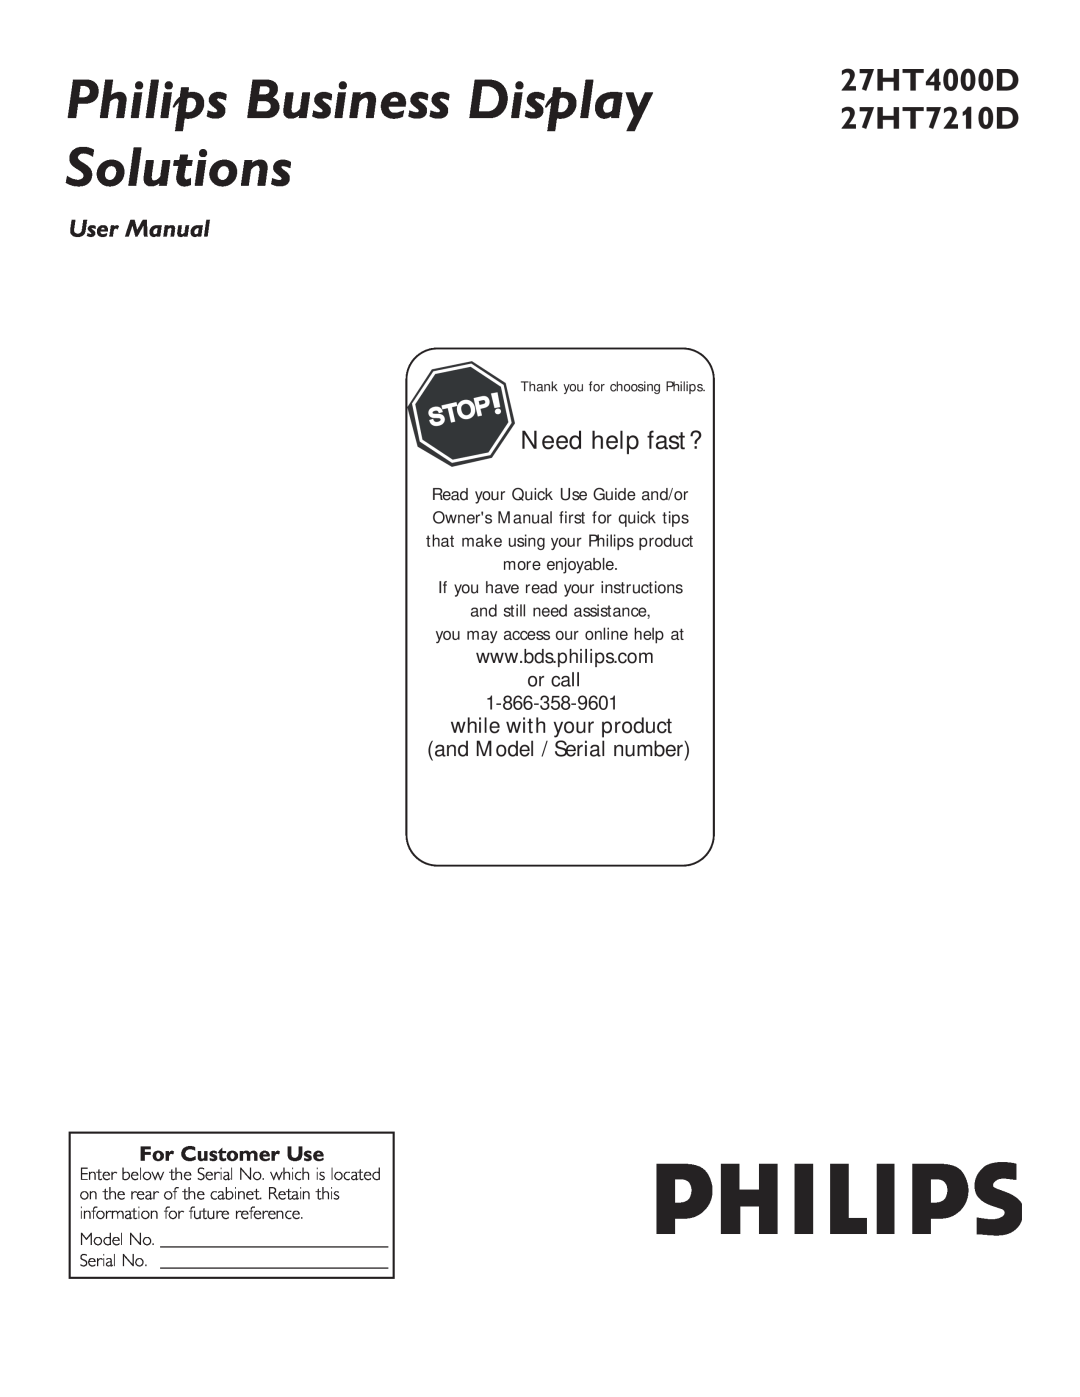 Philips 27HT7210D, 27HT4000D owner manual For Customer Use, If you have read your instructions and still need assistance 